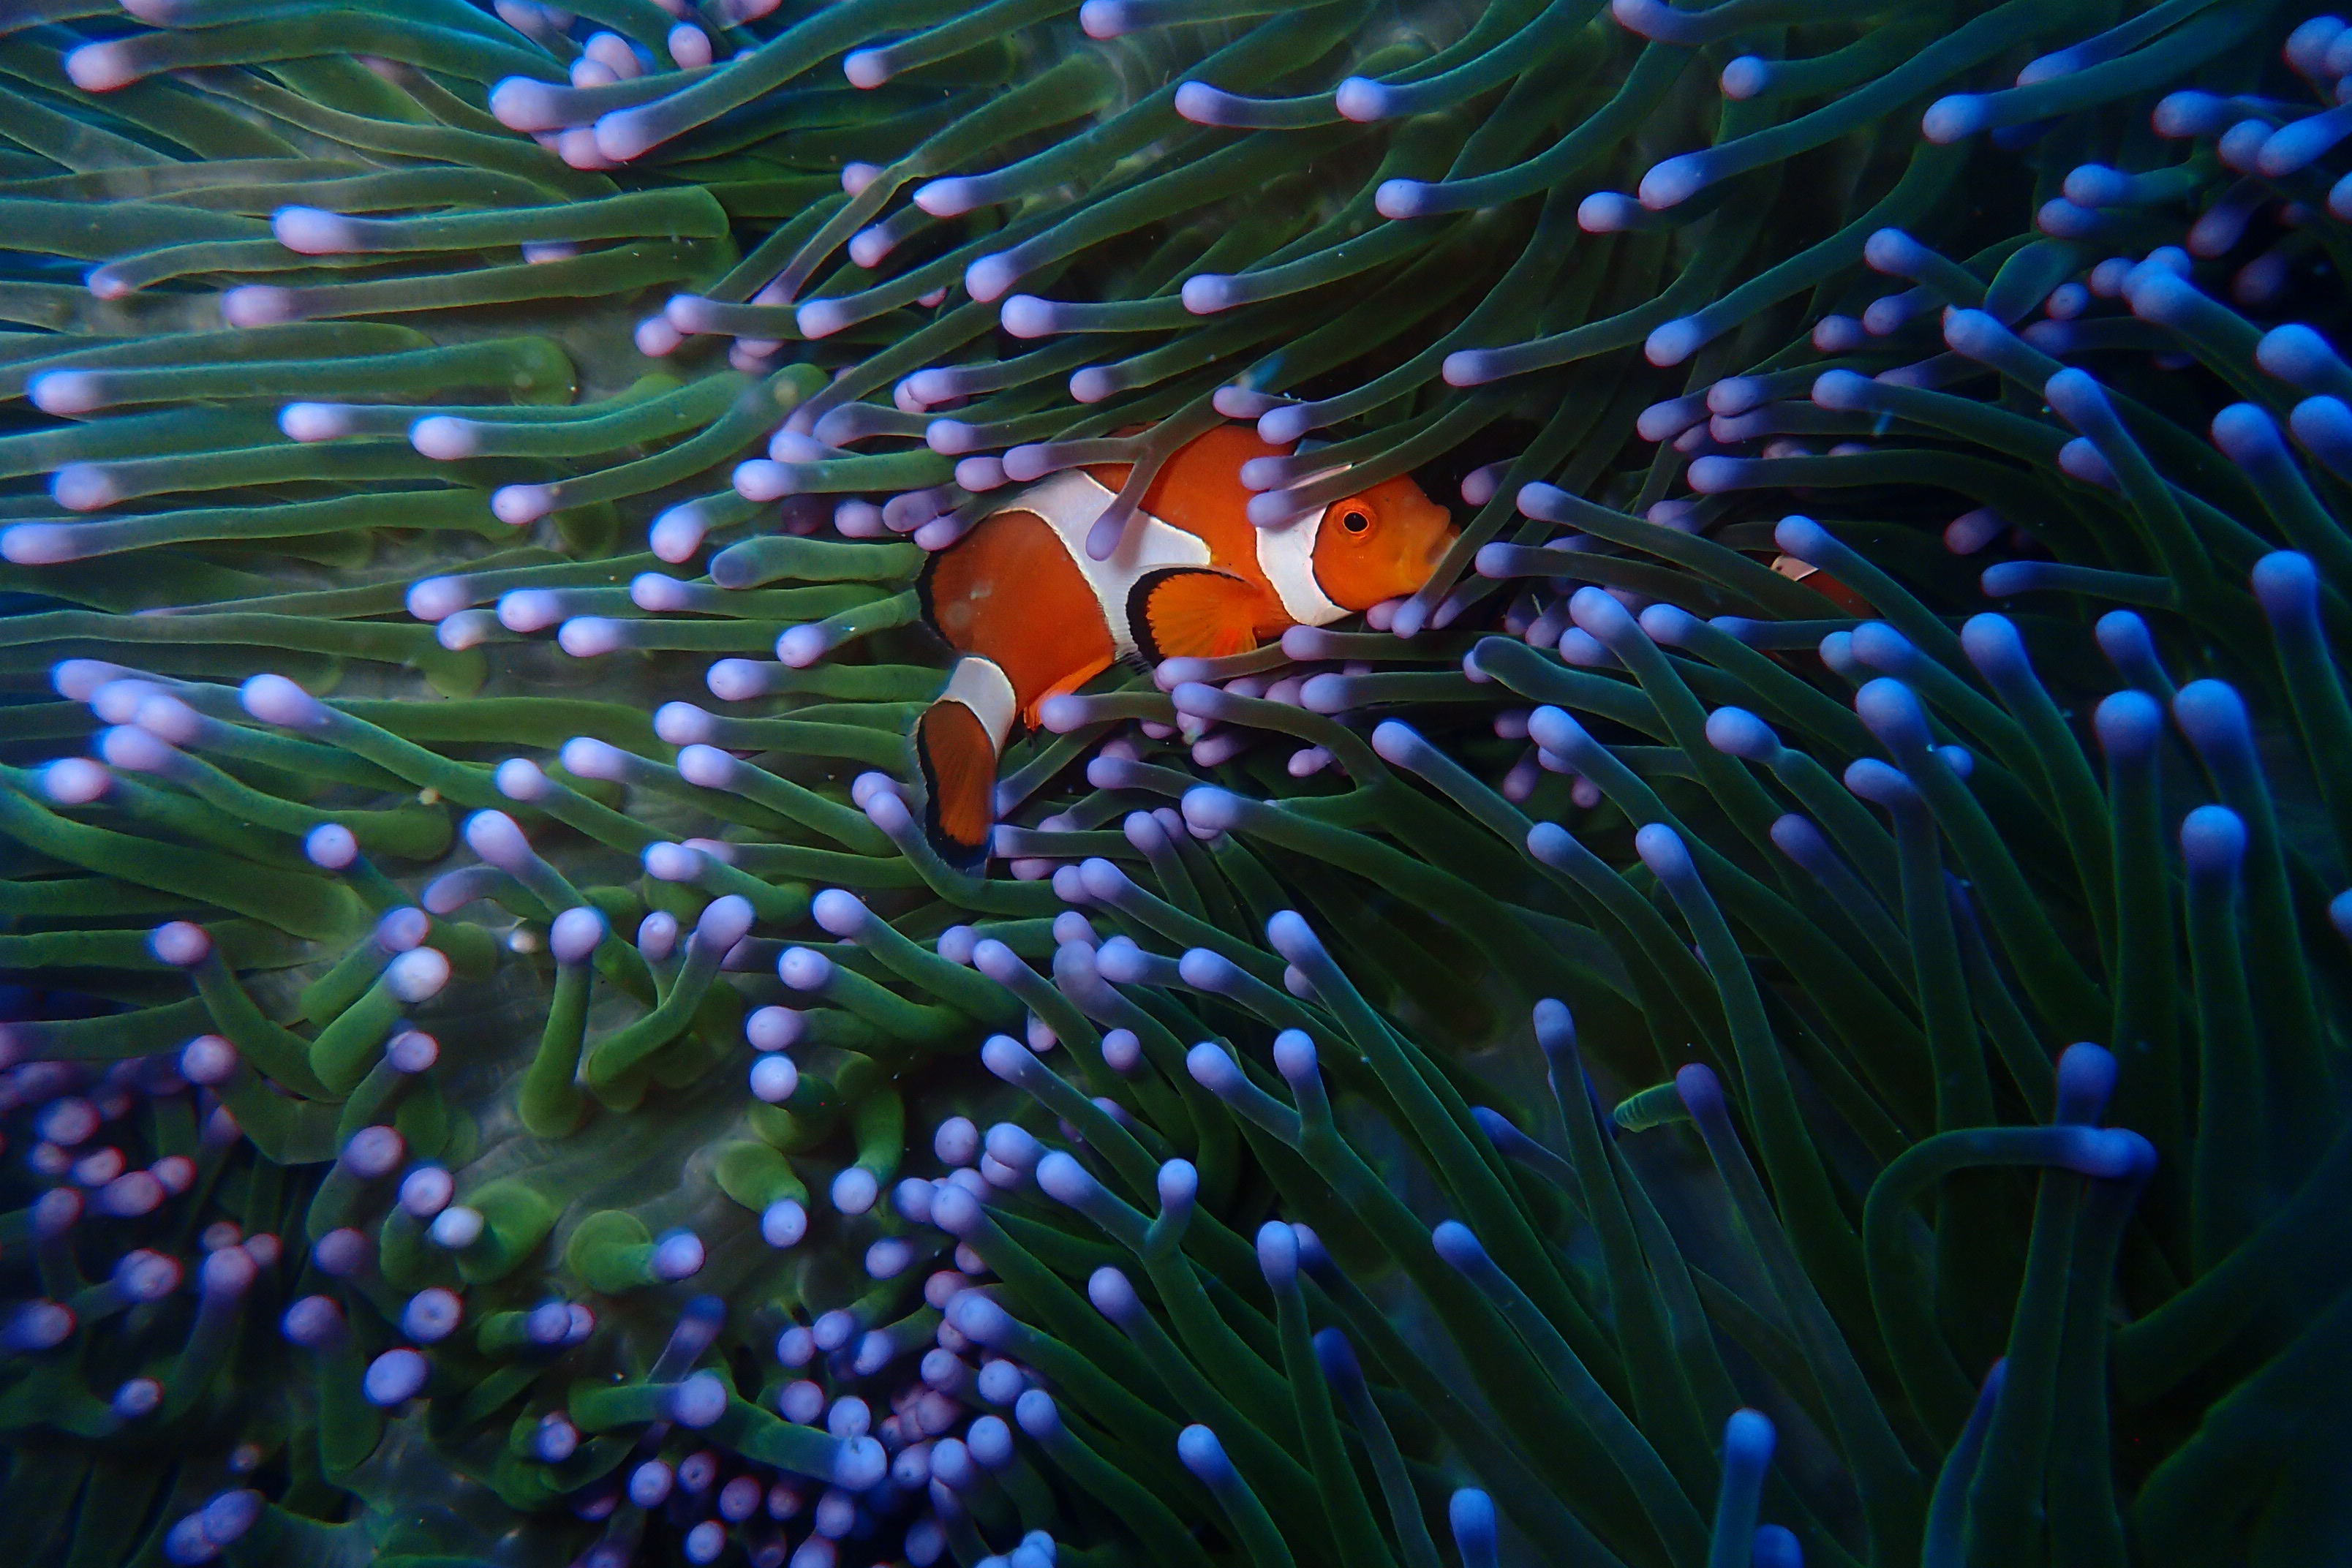 False Clown Anemonefish in Amed